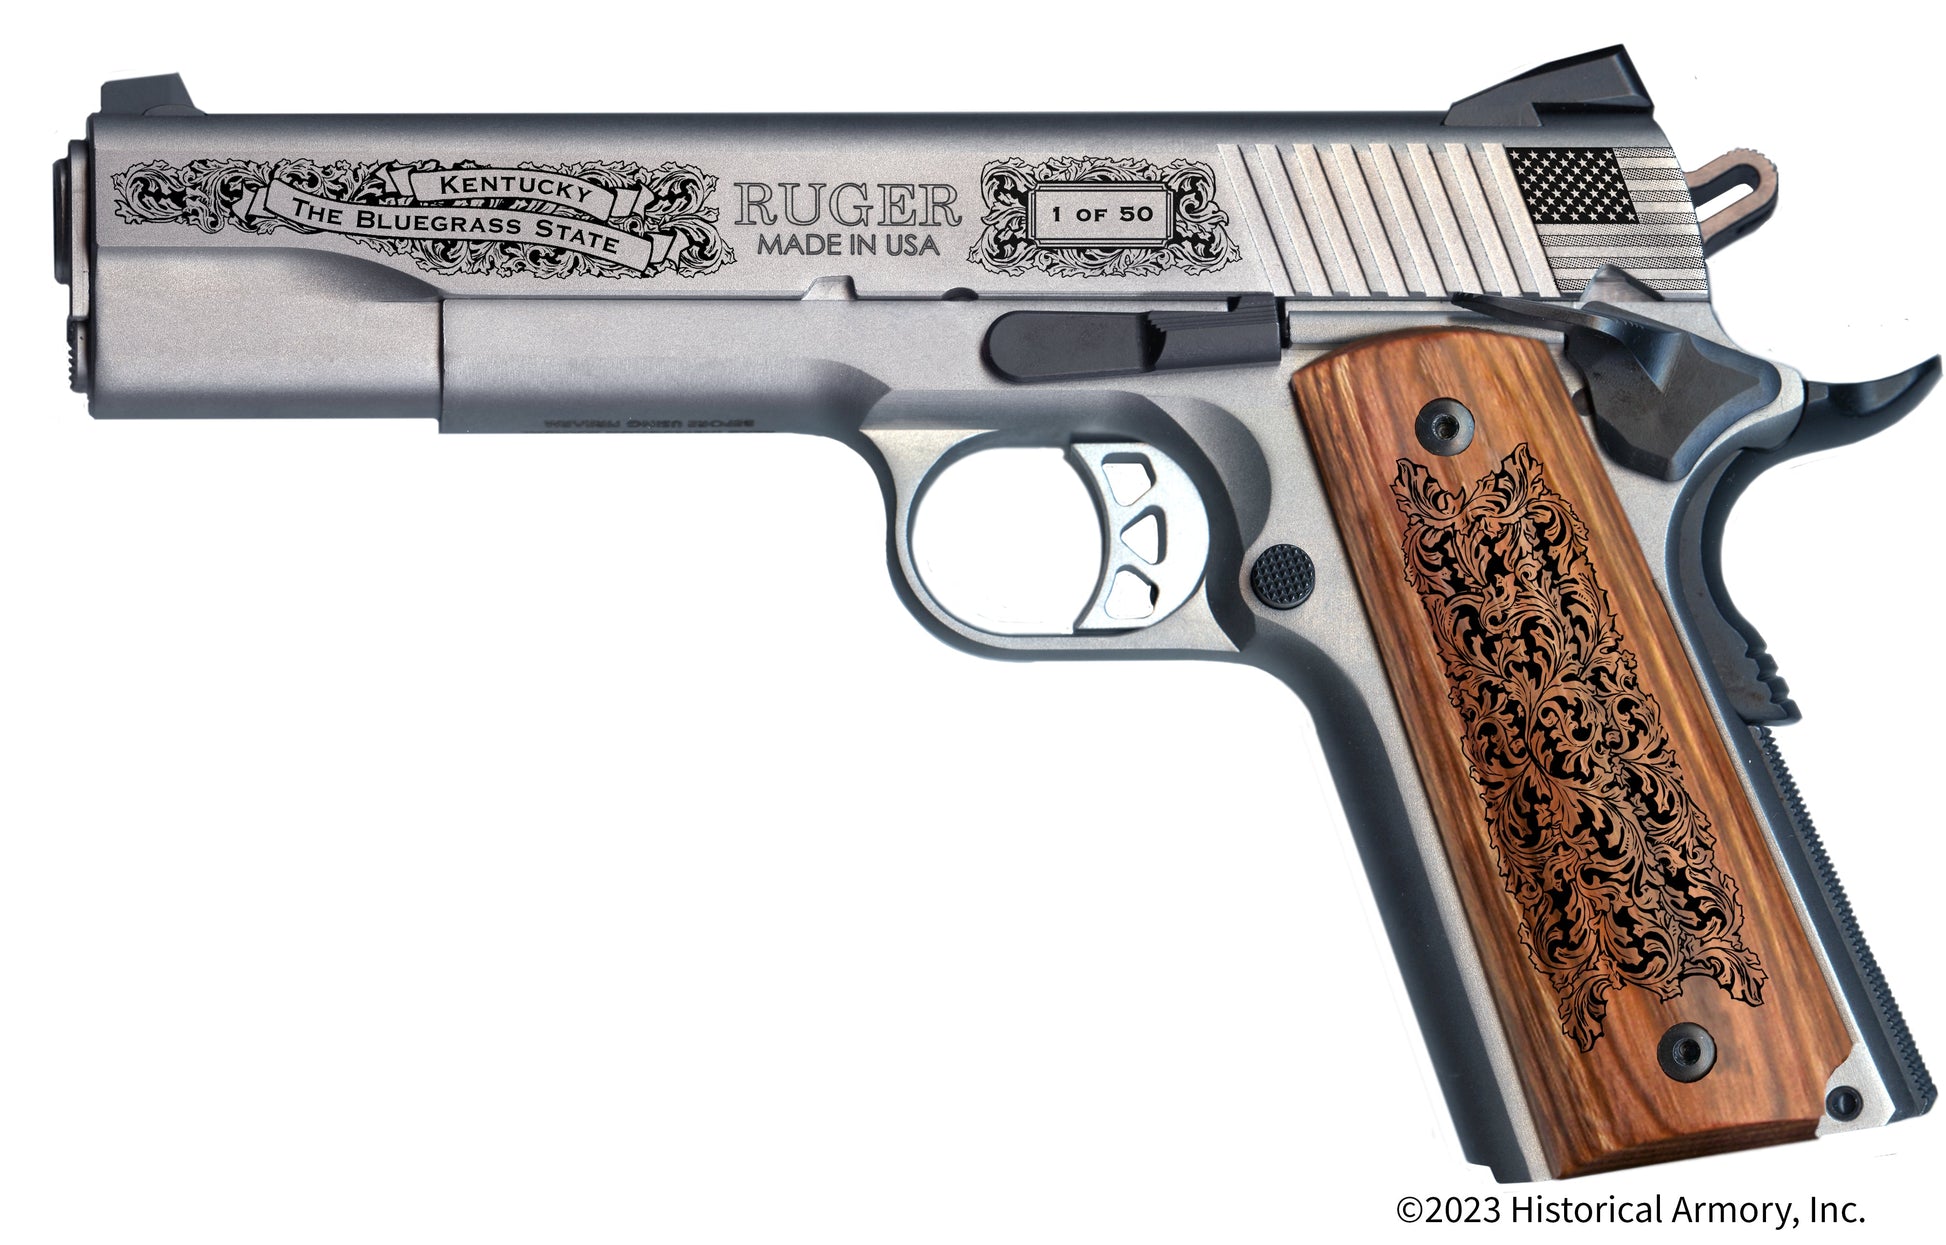 Fleming County Kentucky Engraved .45 Auto Ruger 1911